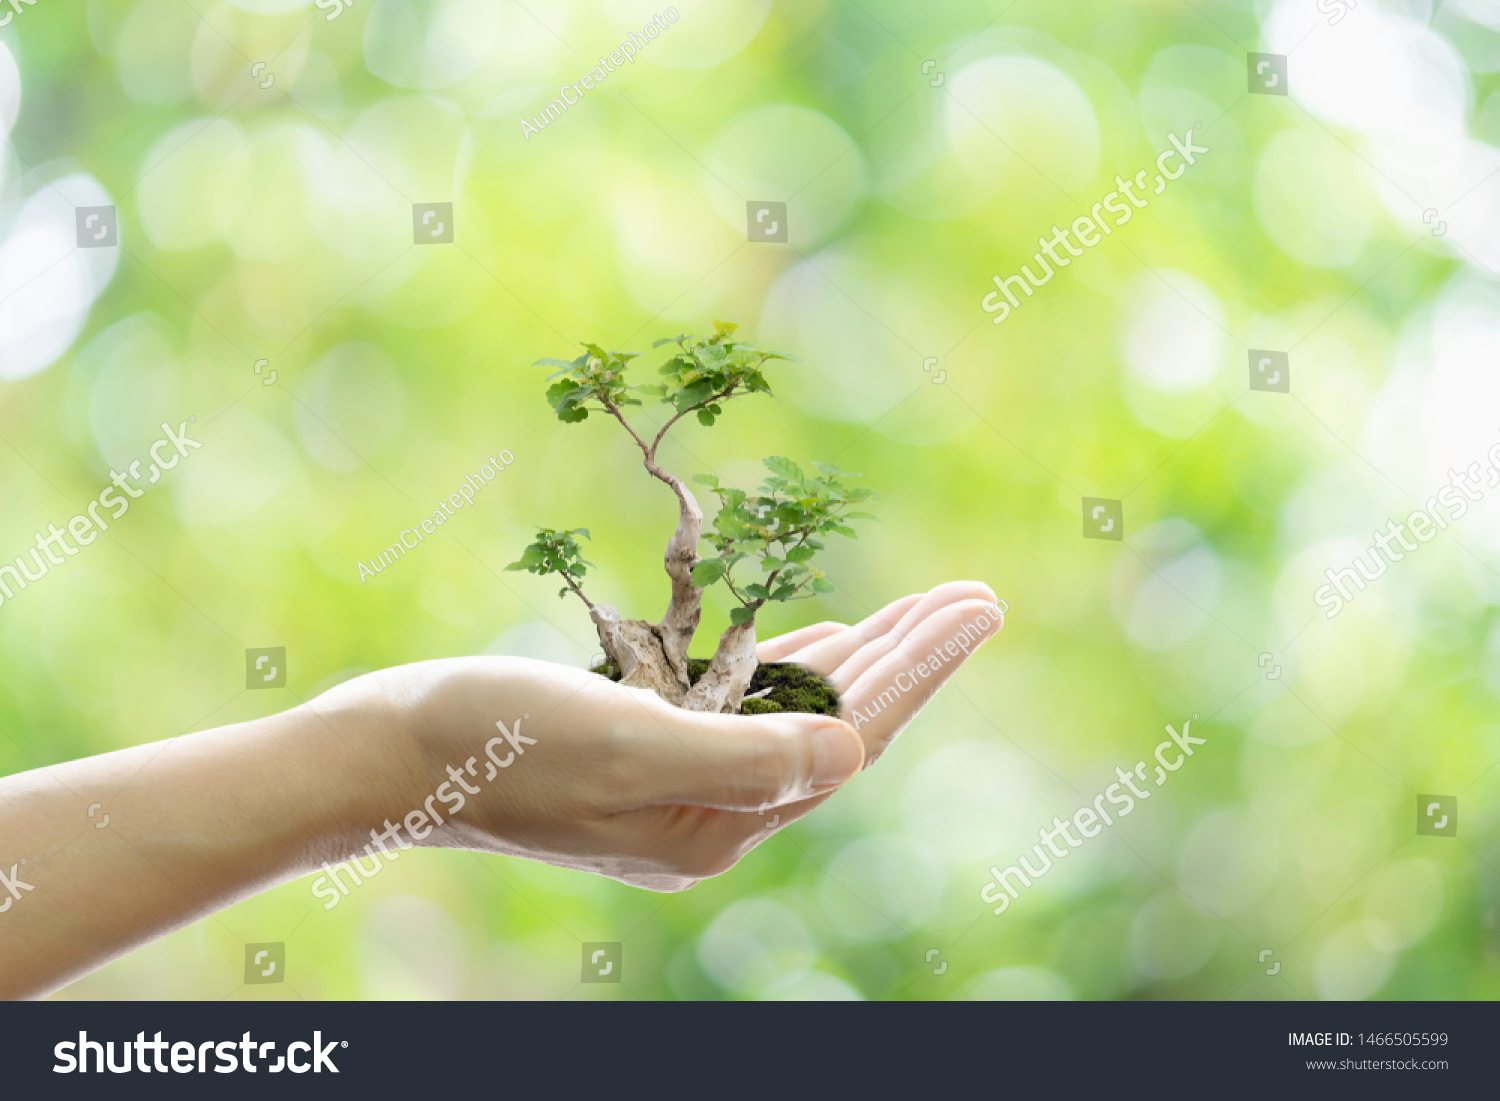 Environmental ecology save the world. Hand holding growing tree on green bokeh background. #1466505599